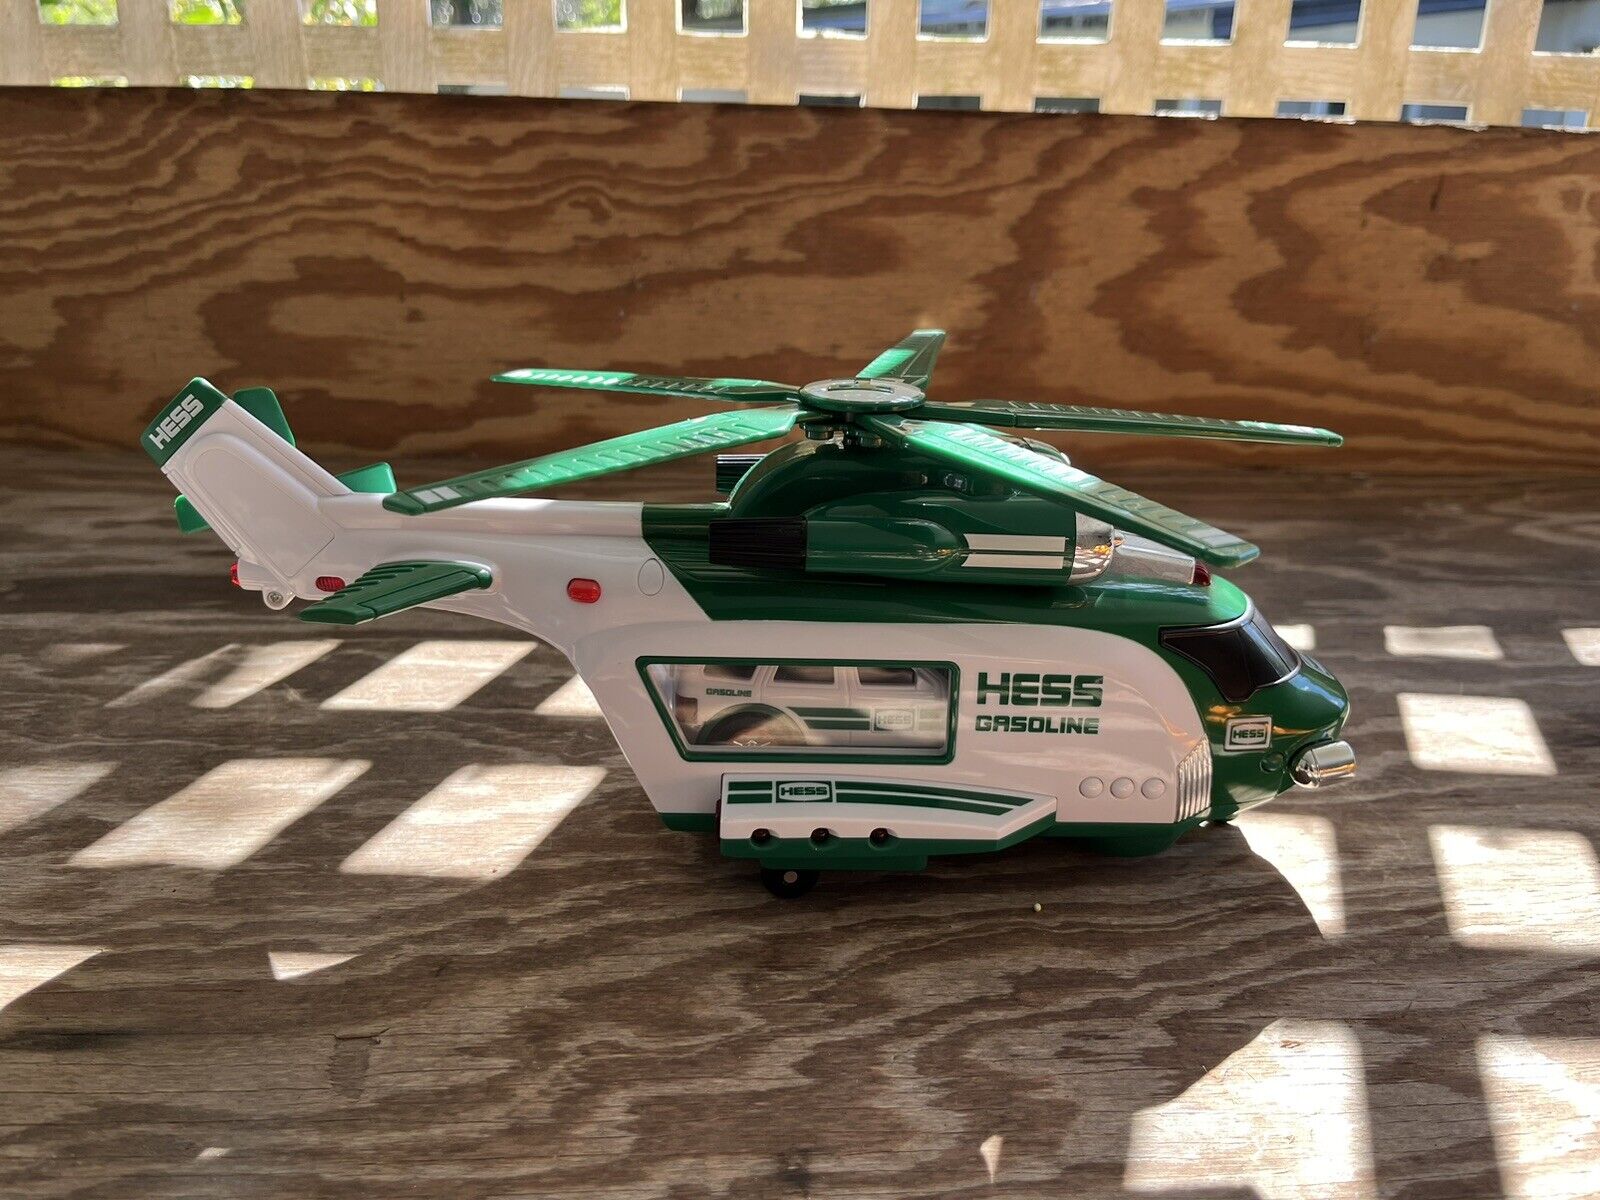 2012 HESS Helicopter and Rescue Toy Truck Vehicles w/ Lights and Sounds